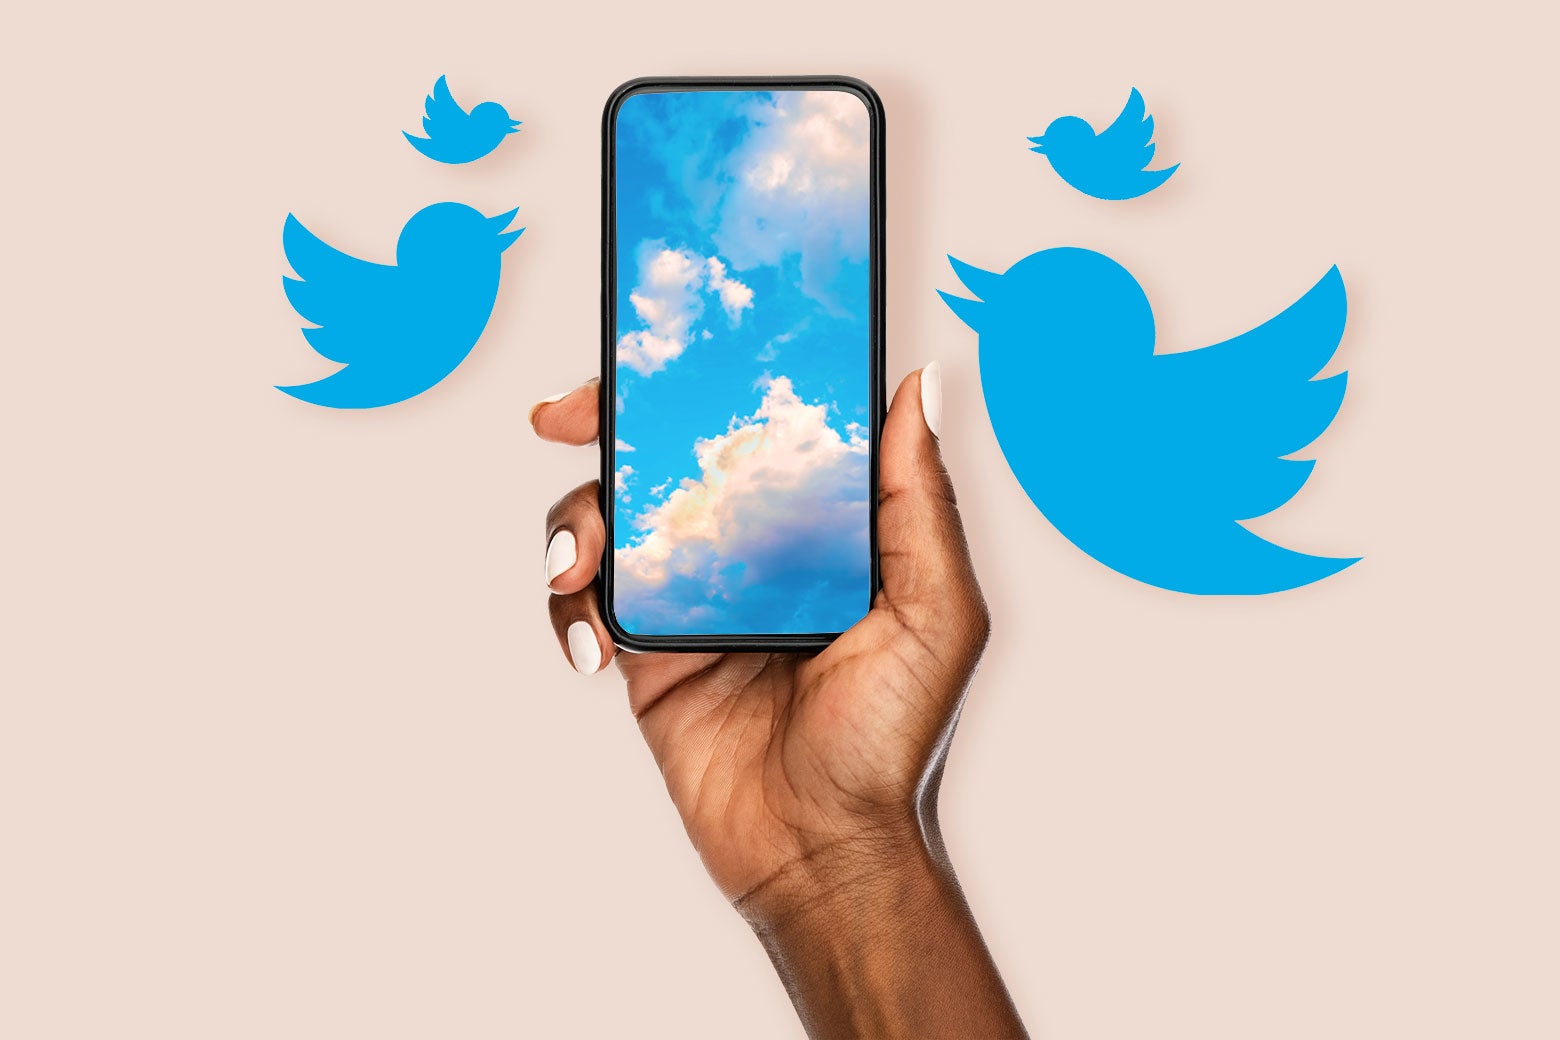 A person holding up a smartphone with an image of a blue sky onscreen, with several Twitter bluebirds hovering around the phone.